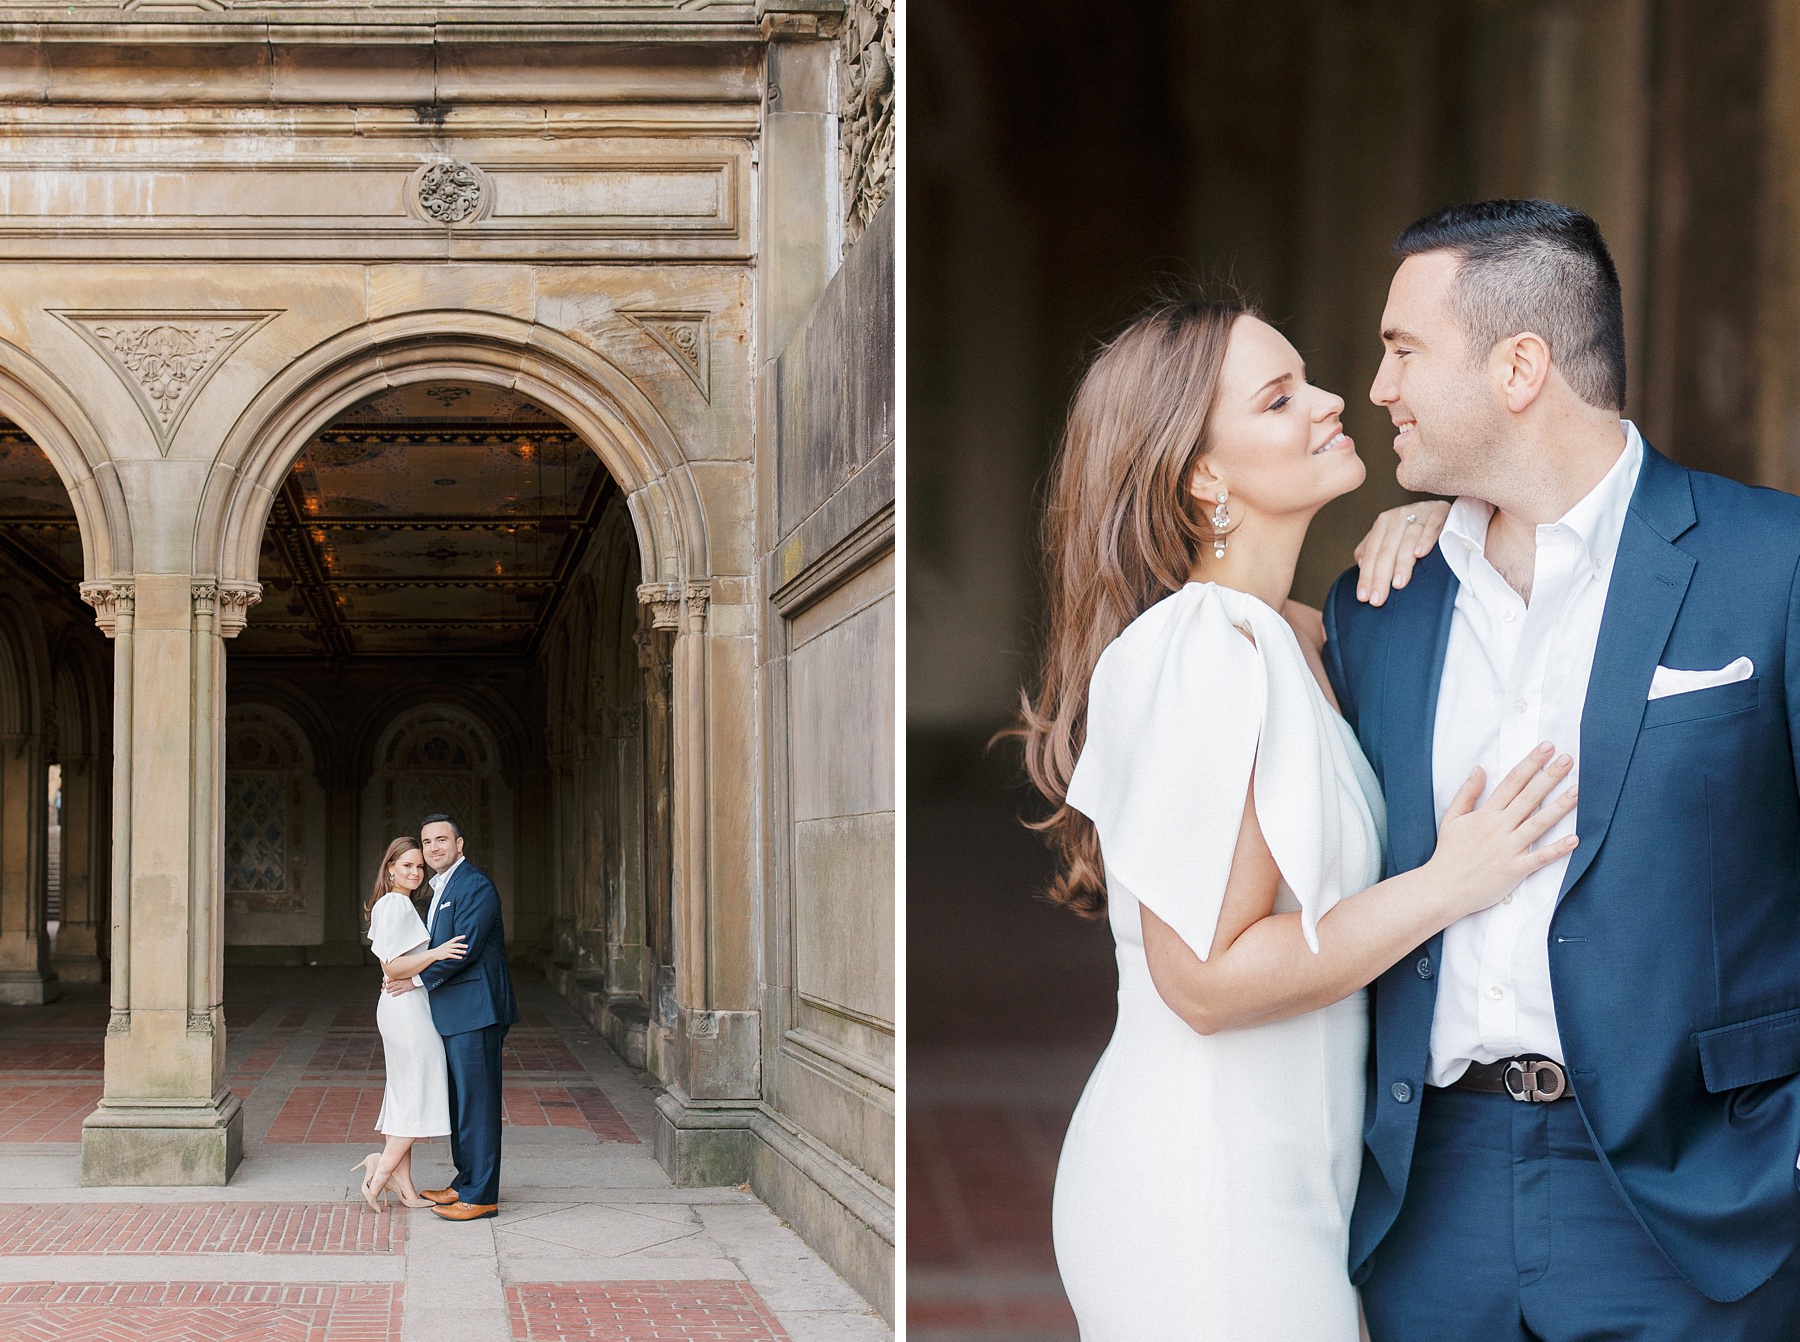 9 Simple Poses for Wedding & Engagement Photos